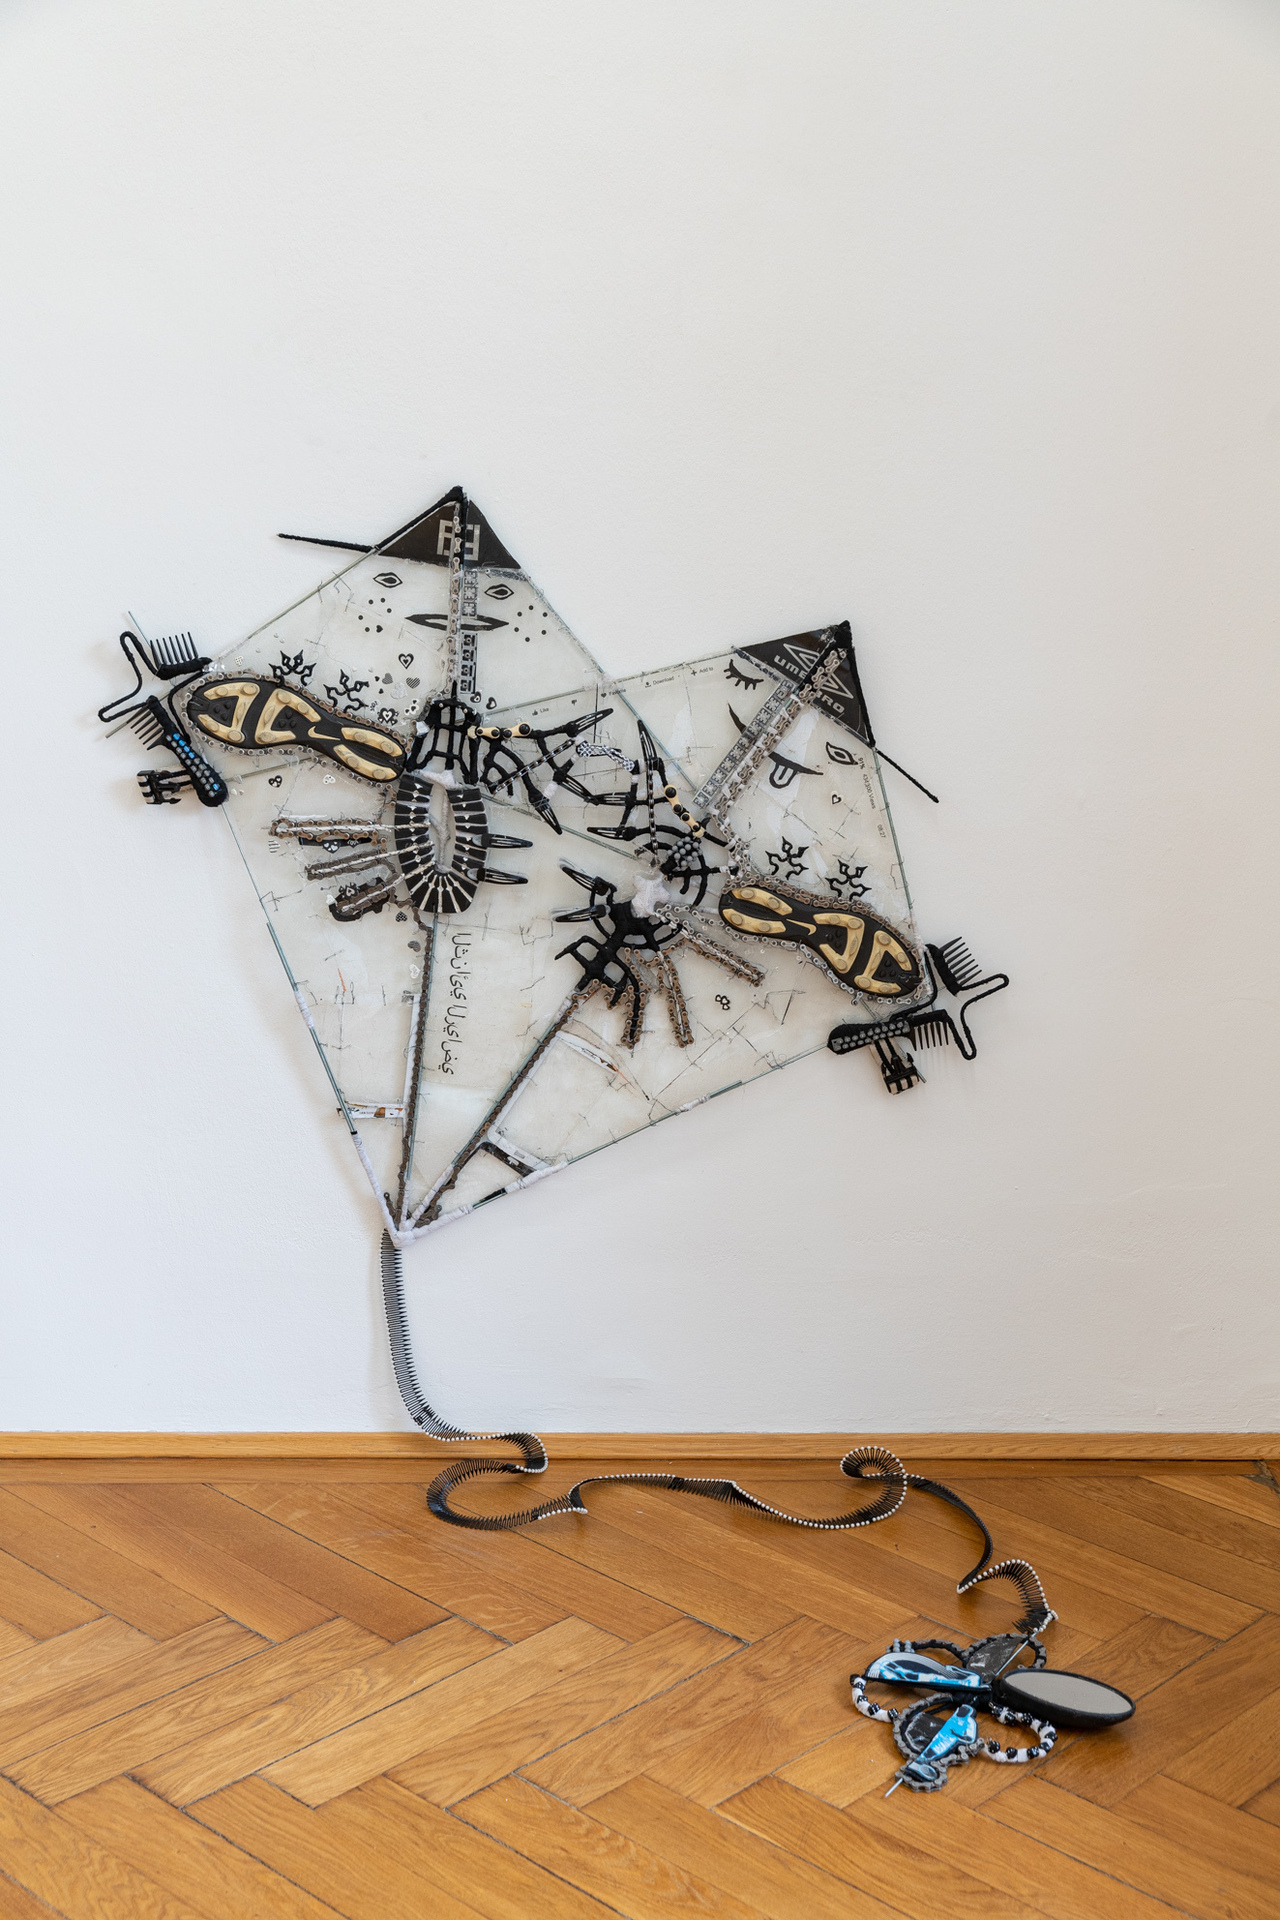 Anna Solal, "The twin kite", 2018, bicycle chains, combs, stickers, wire, iPhone screen, iPad screen, tool, shoe sole, hair clips, keyboard, mirror, cube, 65 x 48 x 1,5 cm